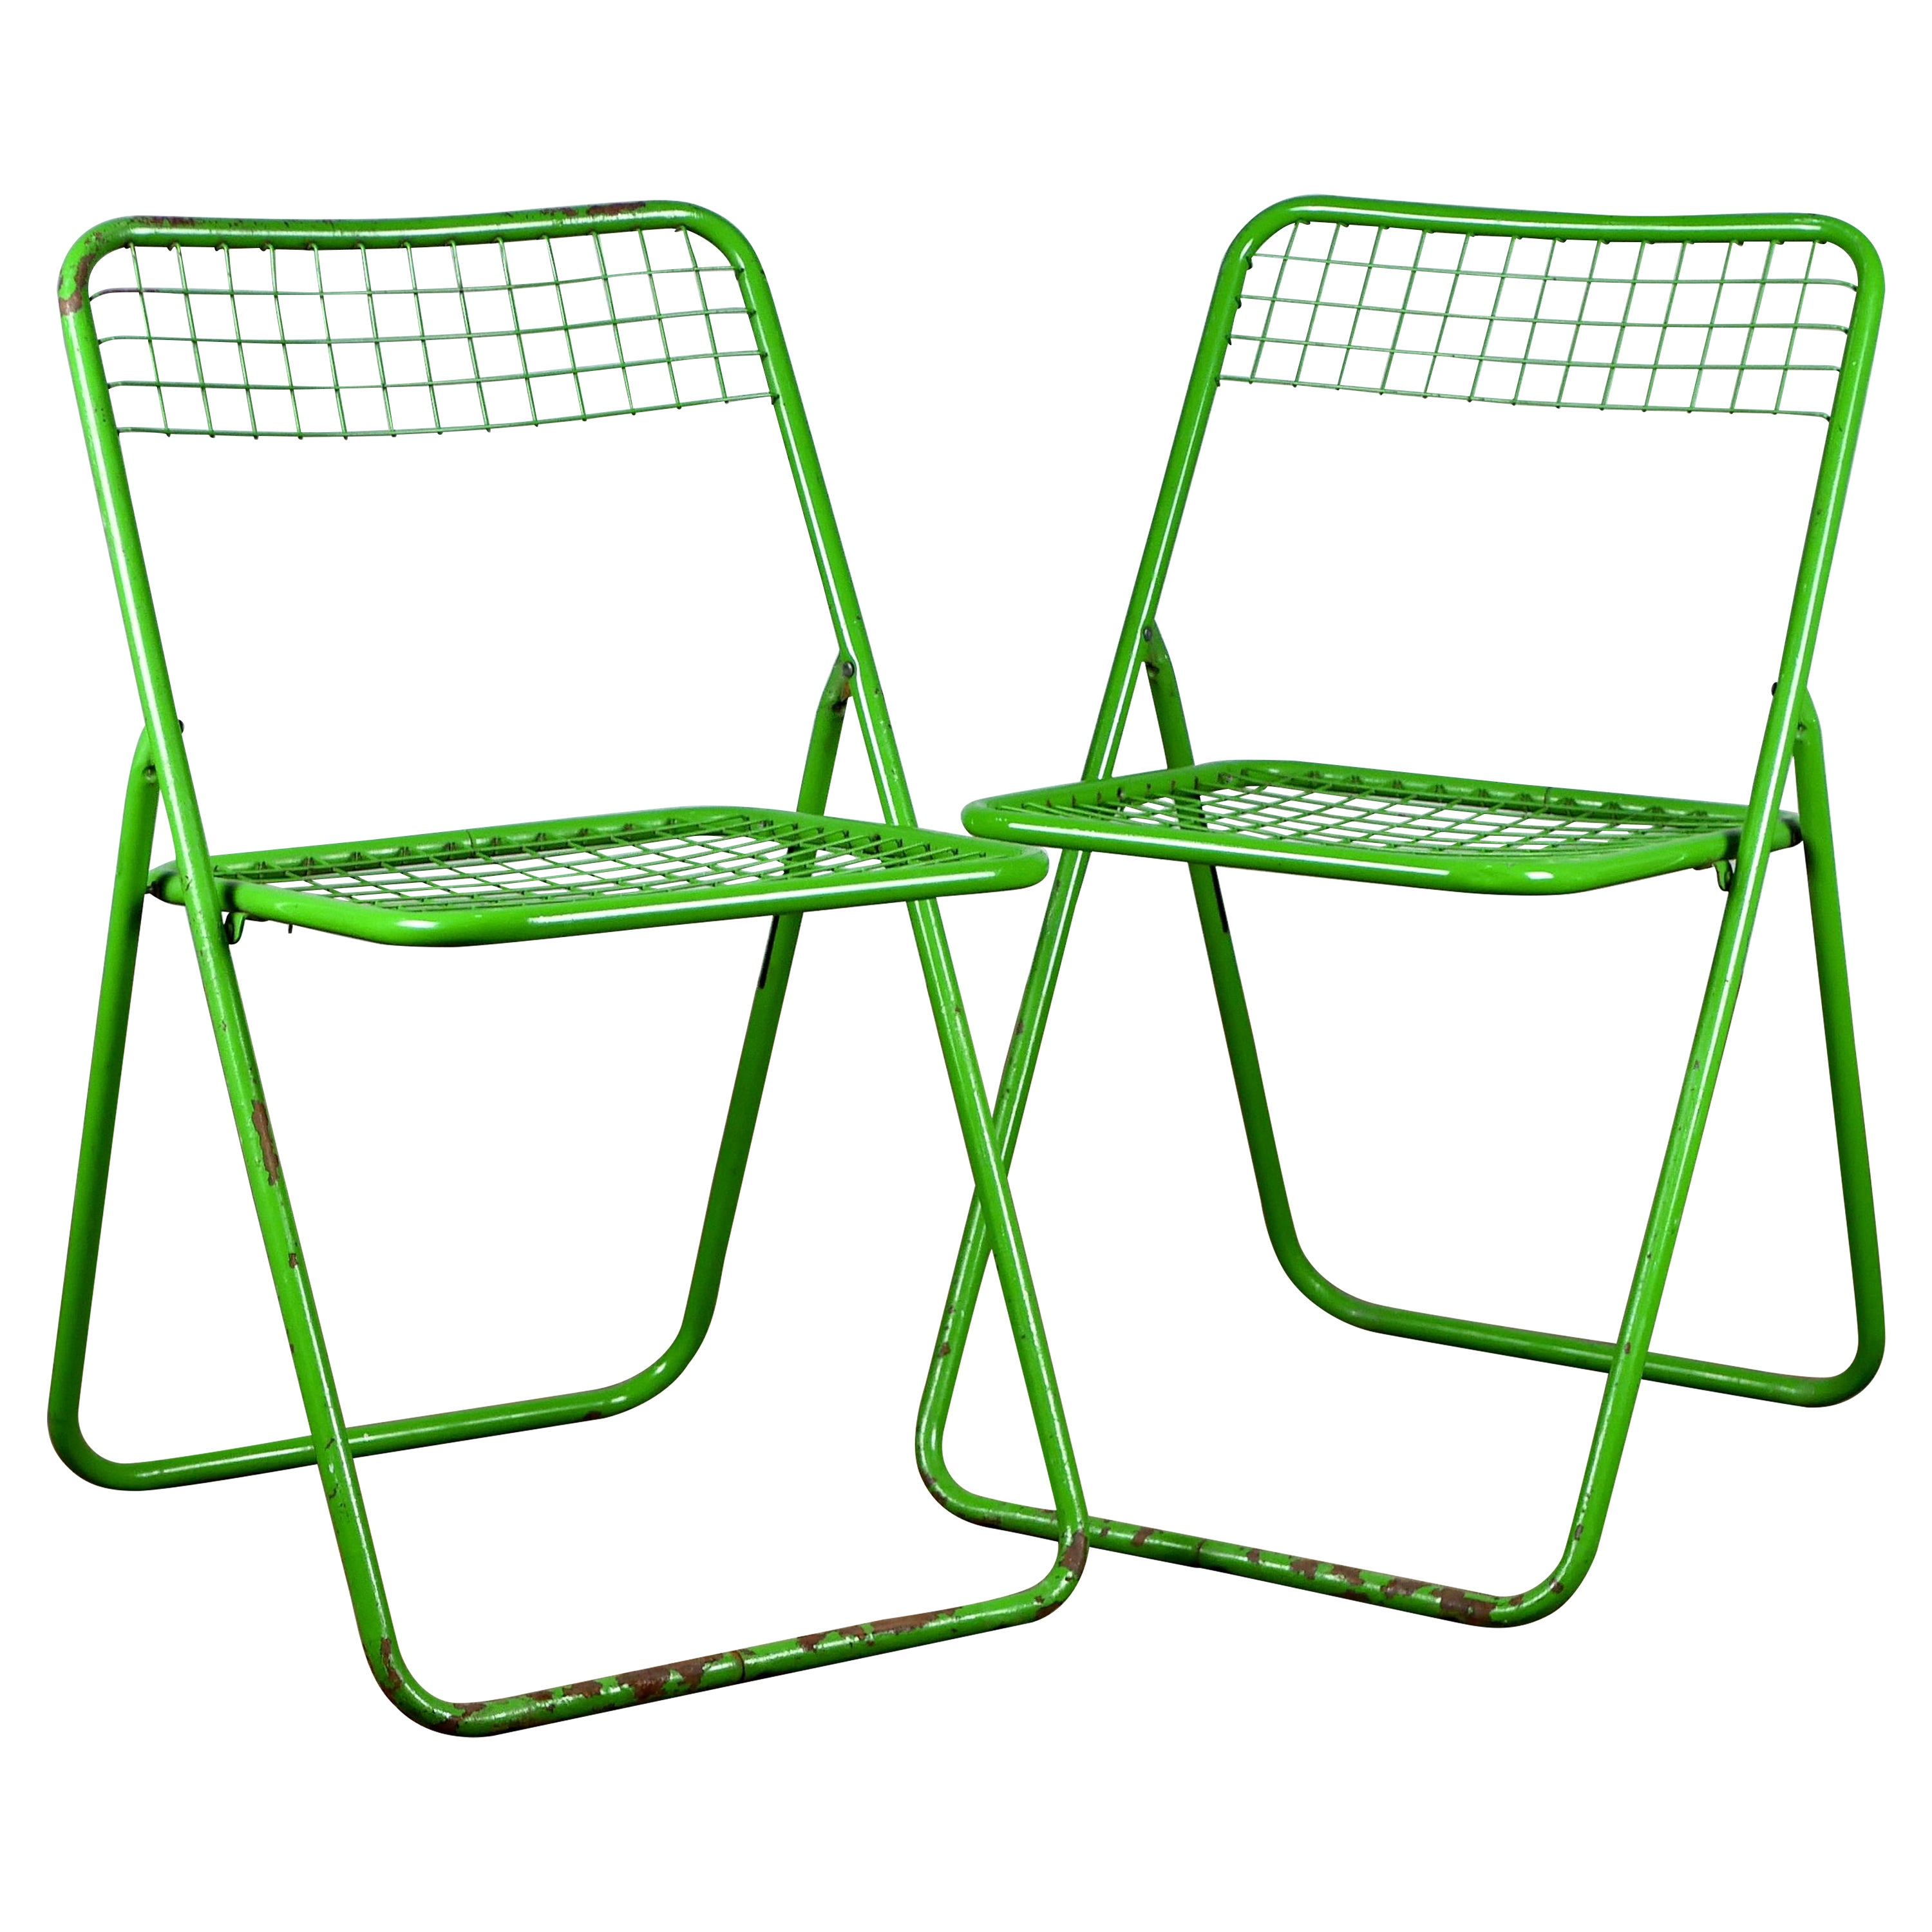 Pair of Green Folding Ted Net Chairs by Niels Gammelgaard for Ikea, 1980s